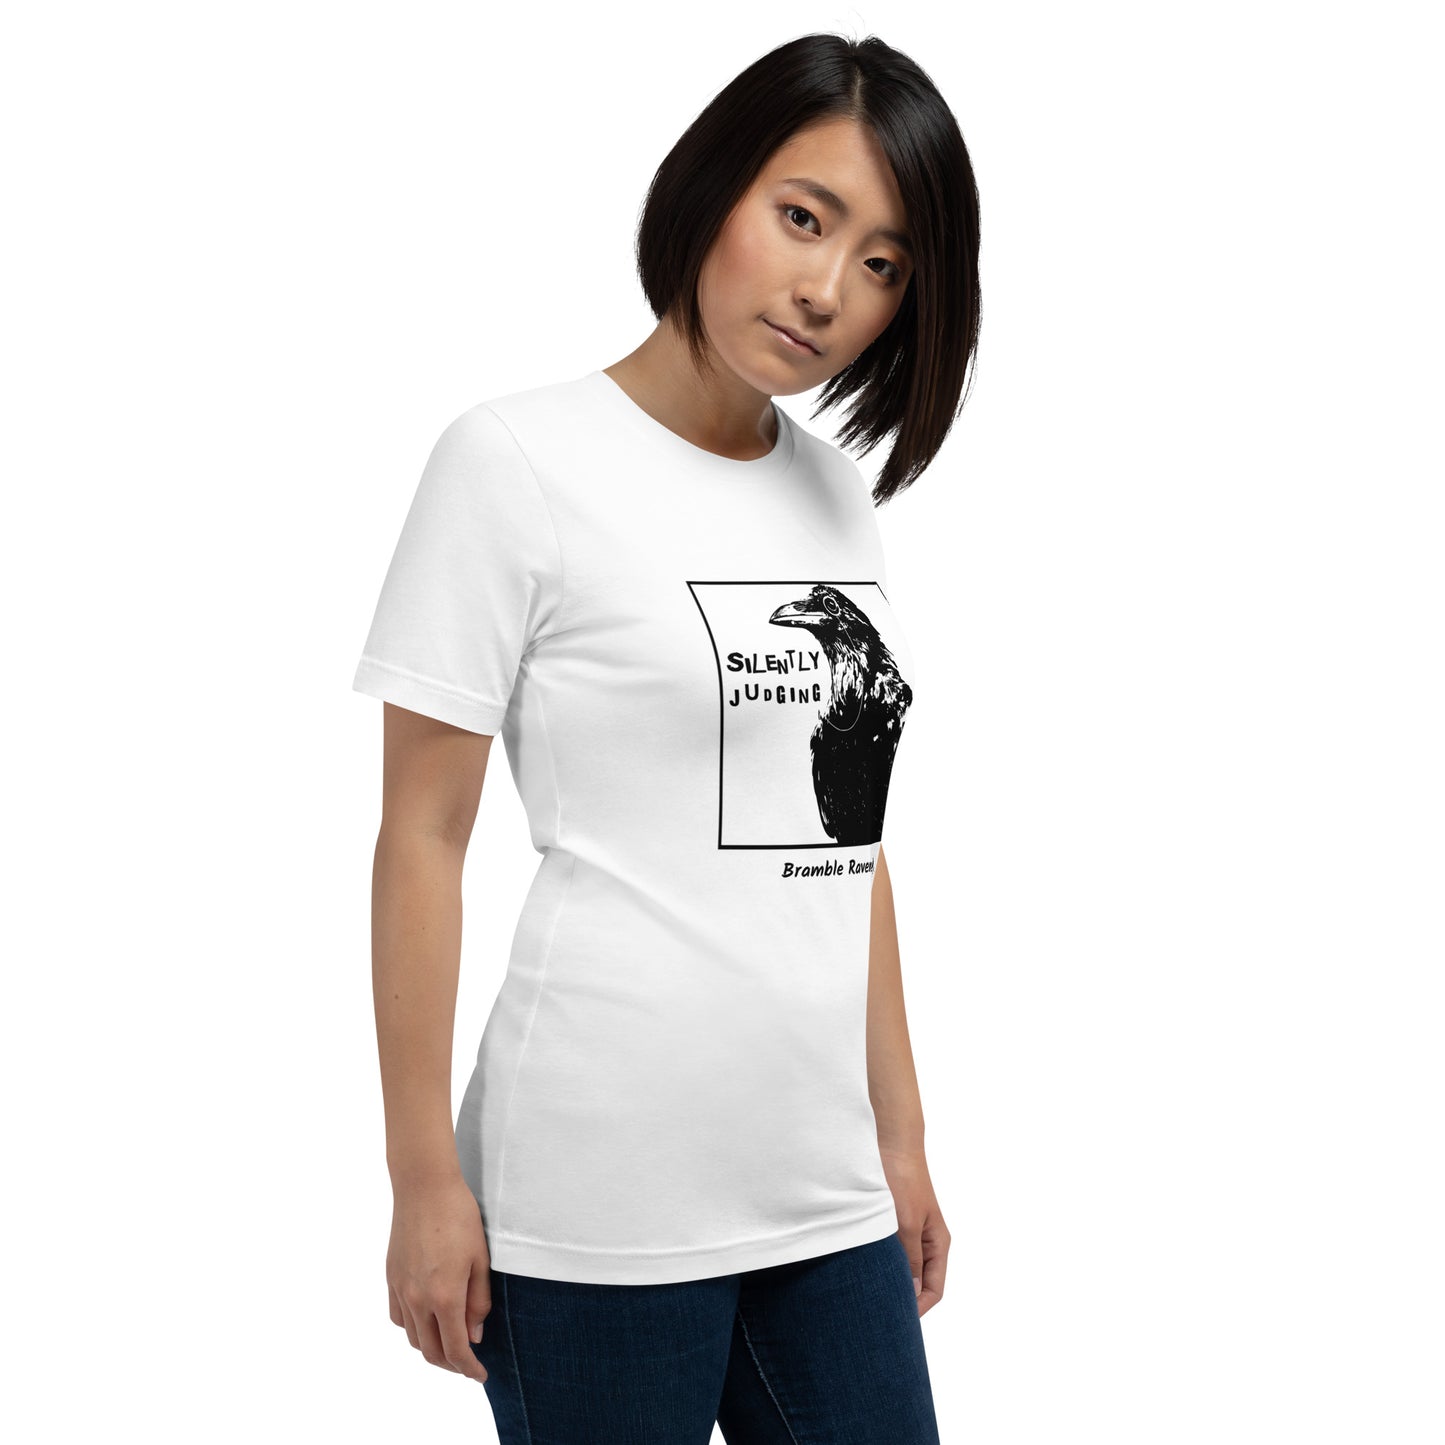 Unisex white colored t-shirt. Features silently judging text next to black crow wearing a monocle in a square frame on a white background.  Shown on female model.